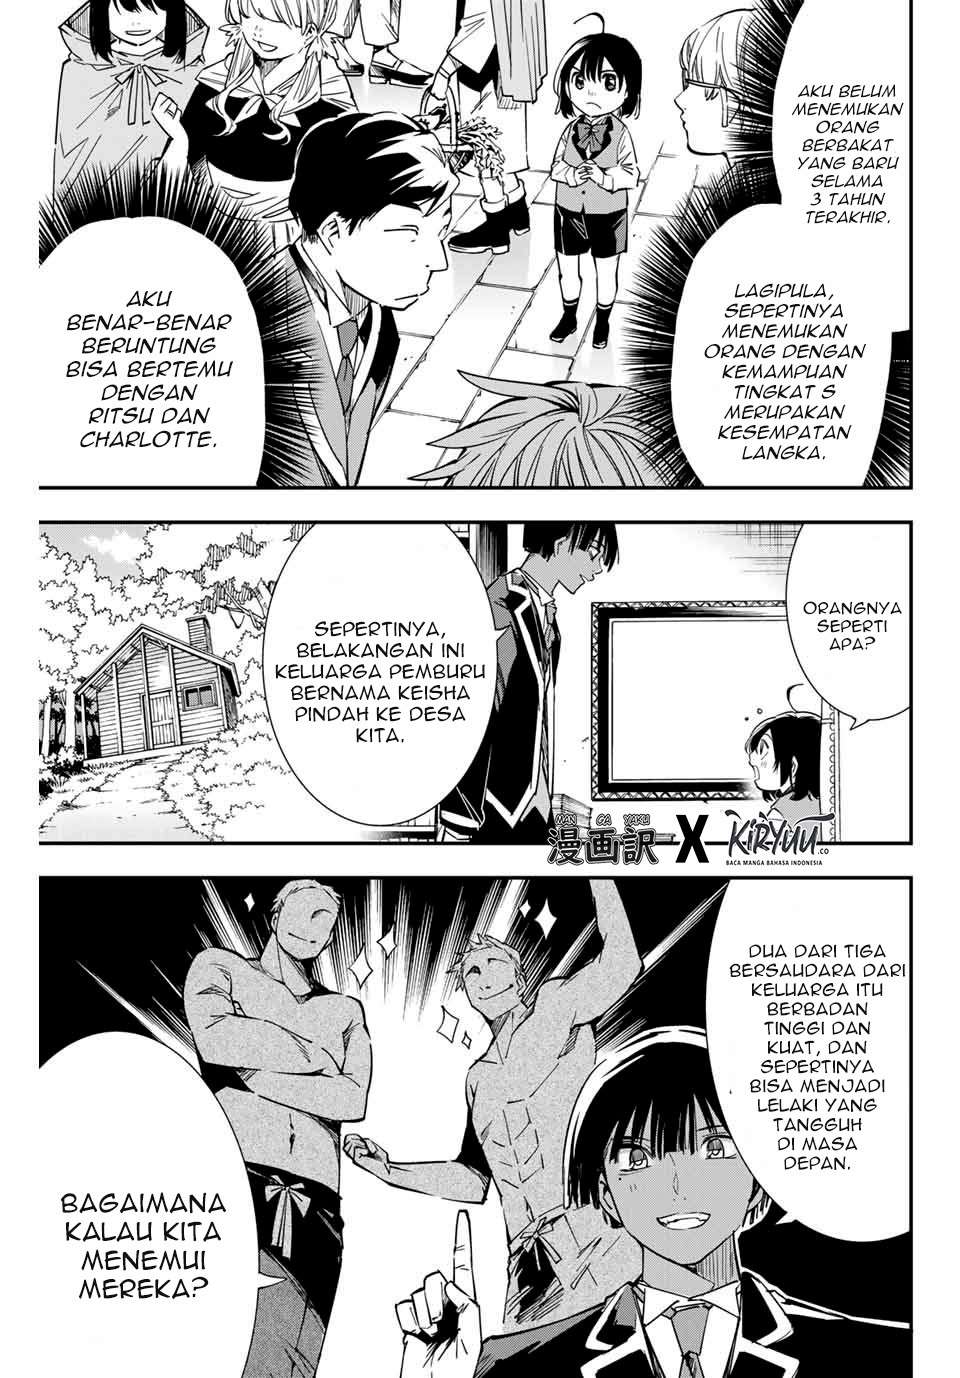 Reincarnated as an Aristocrat with an Appraisal Chapter 11 Bahasa Indonesia